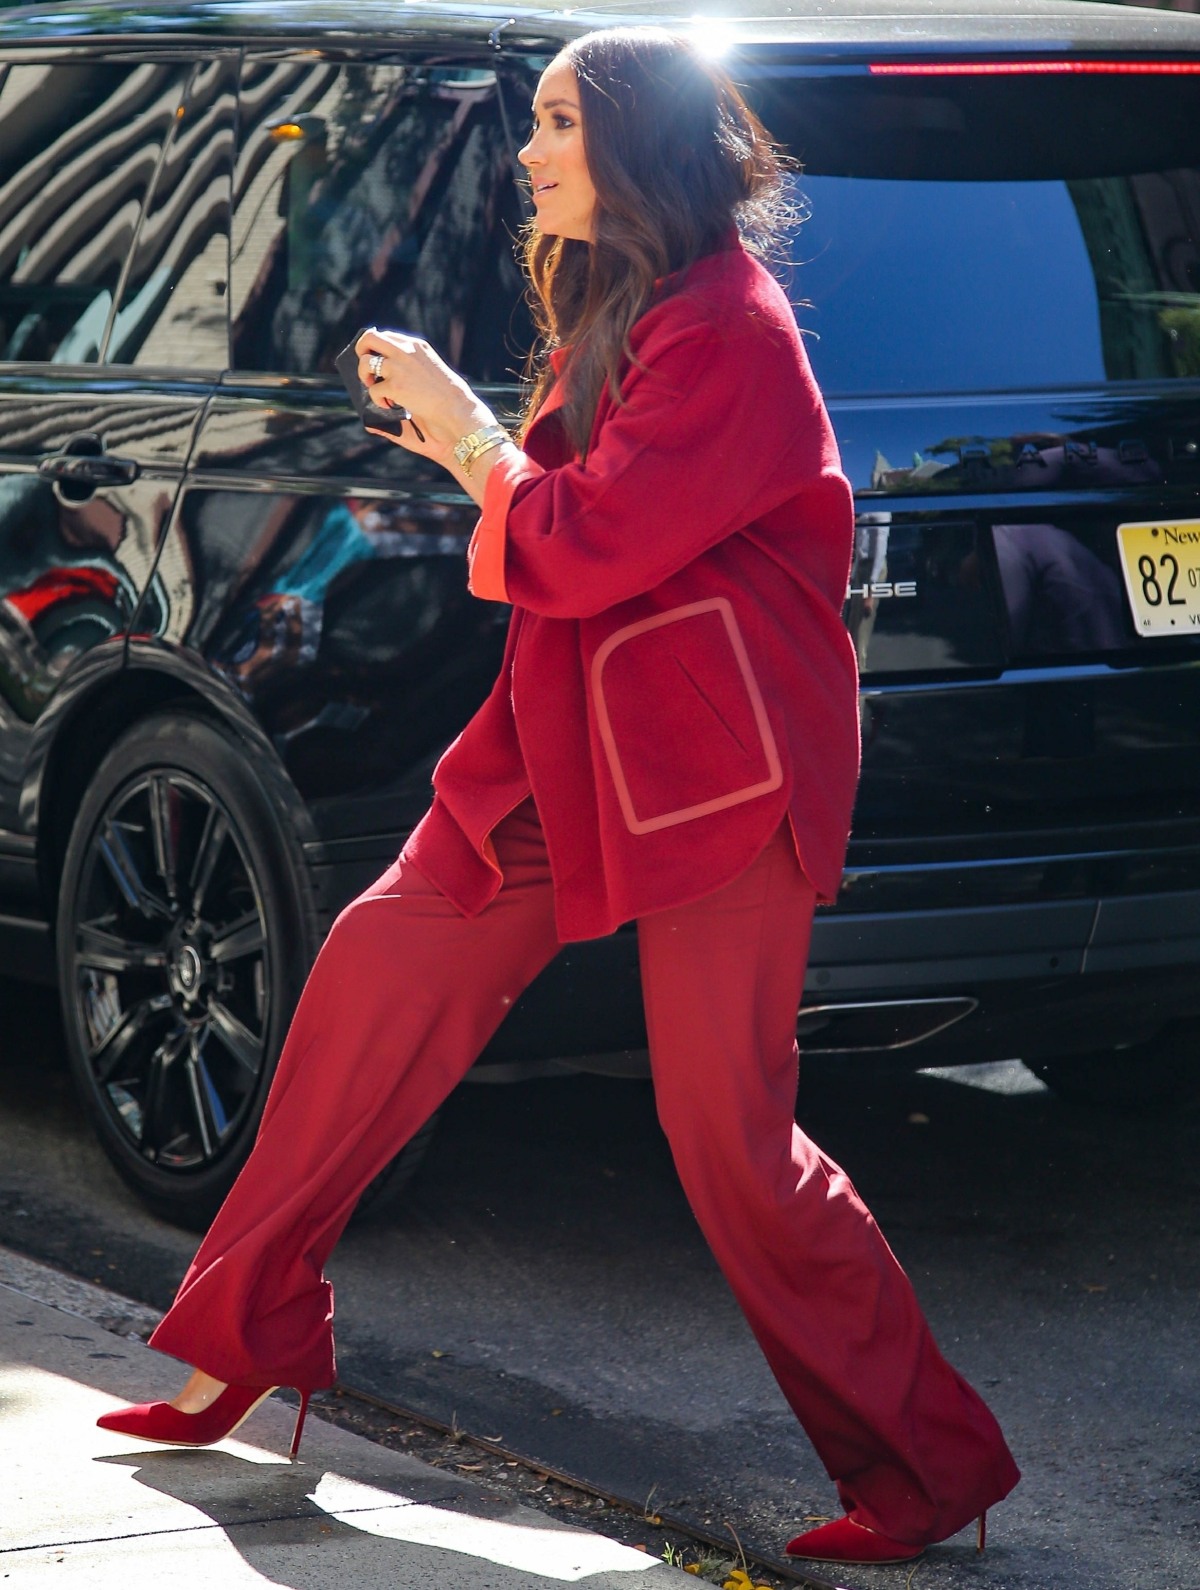 Meghan Markle looks stylish in a red velvet suit as she arrives at a Harlem elementary school